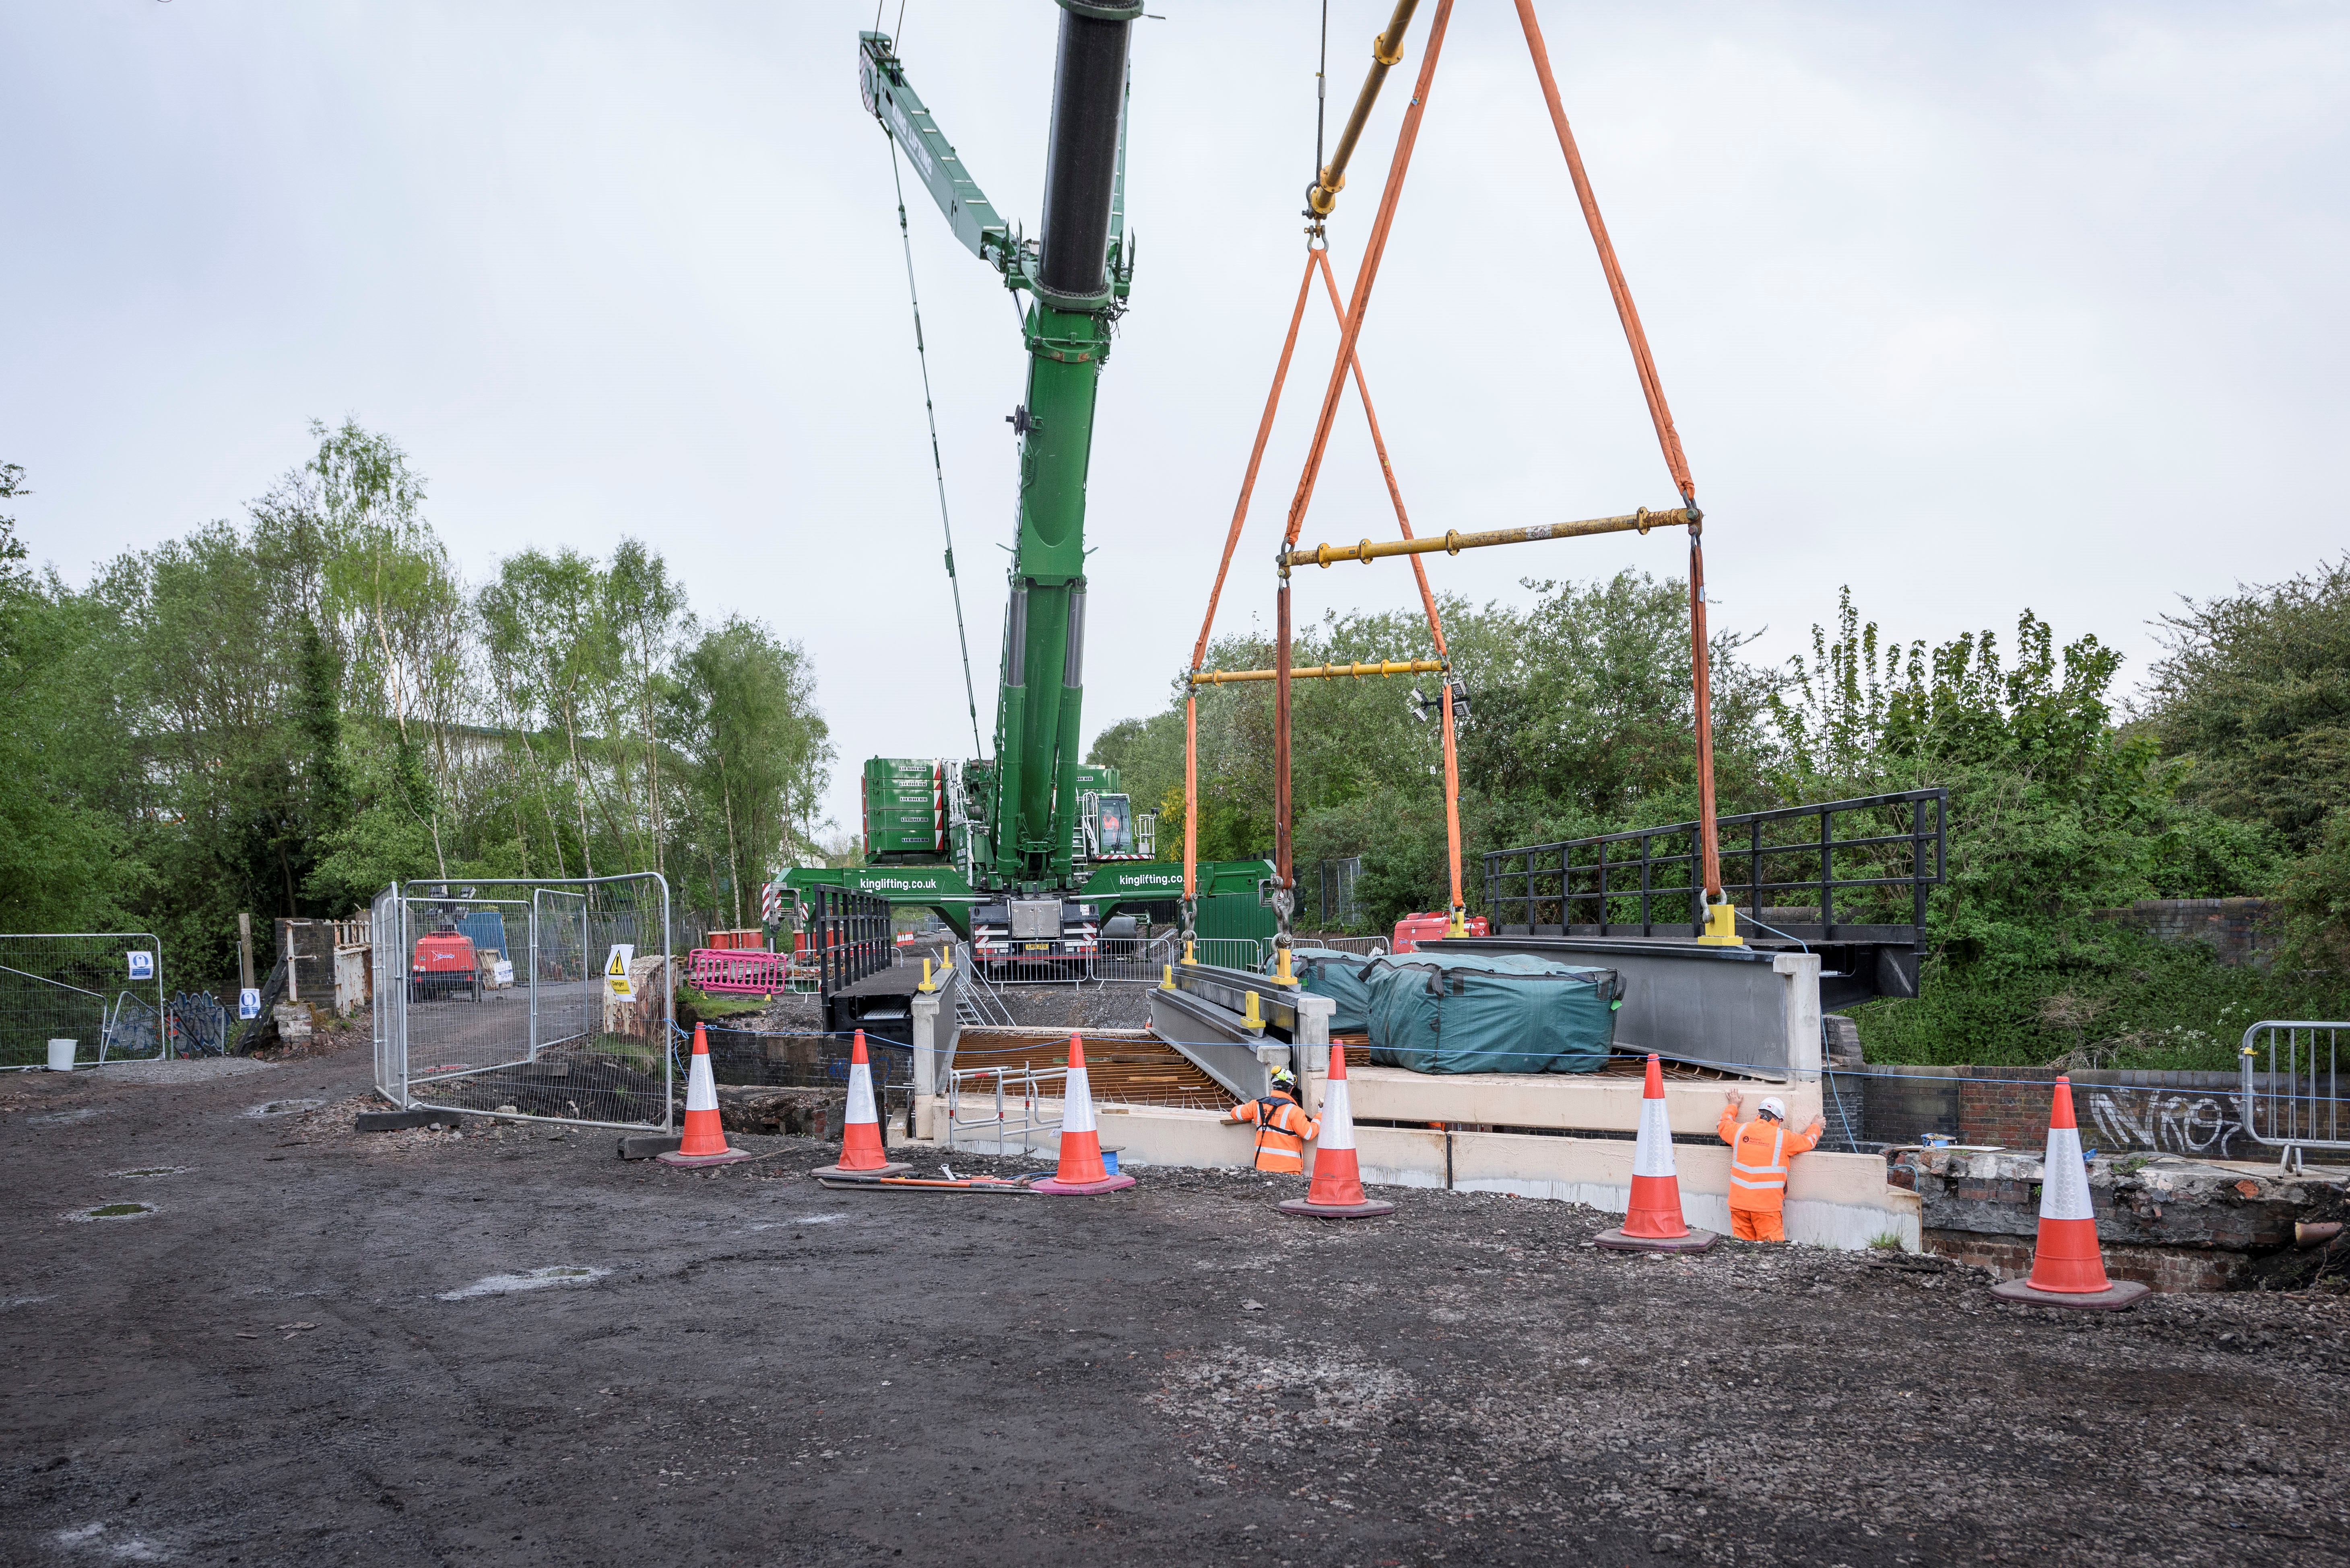 First New Bridge Installed for Wednesbury to Brierley Hill Metro Extension Press Release